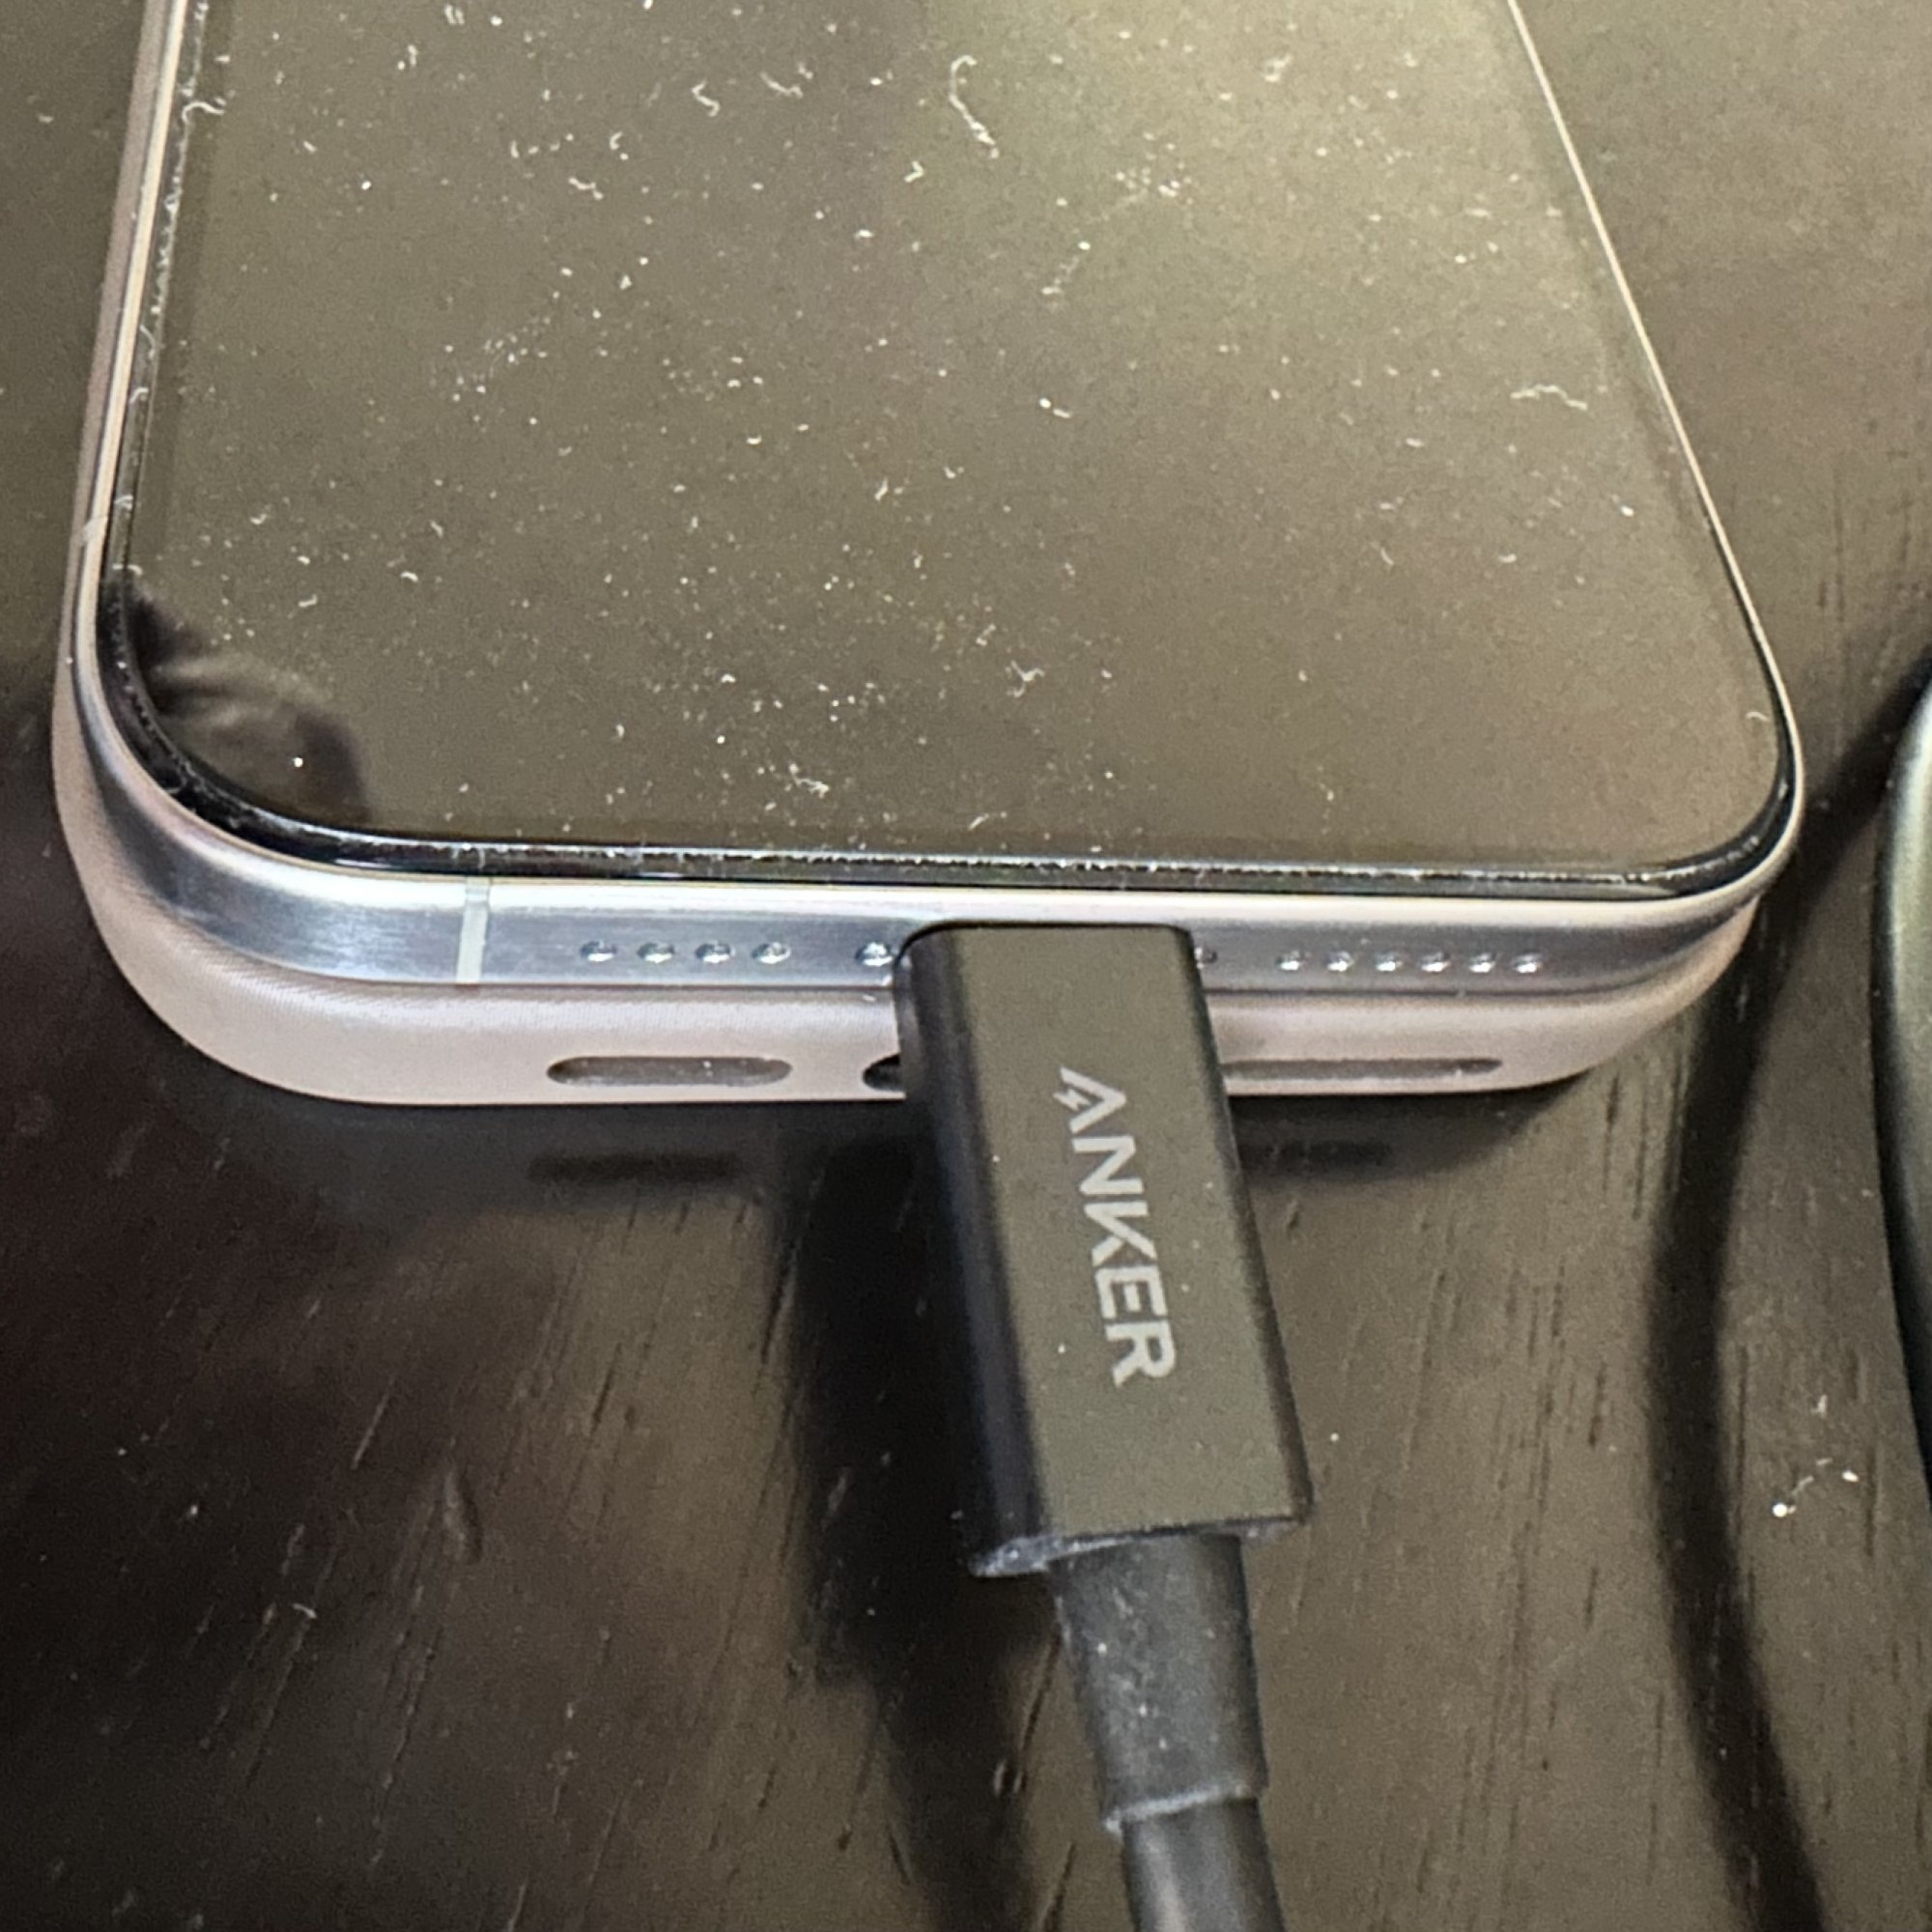 USB-C iPhones are here, but will Backbone One work with them?